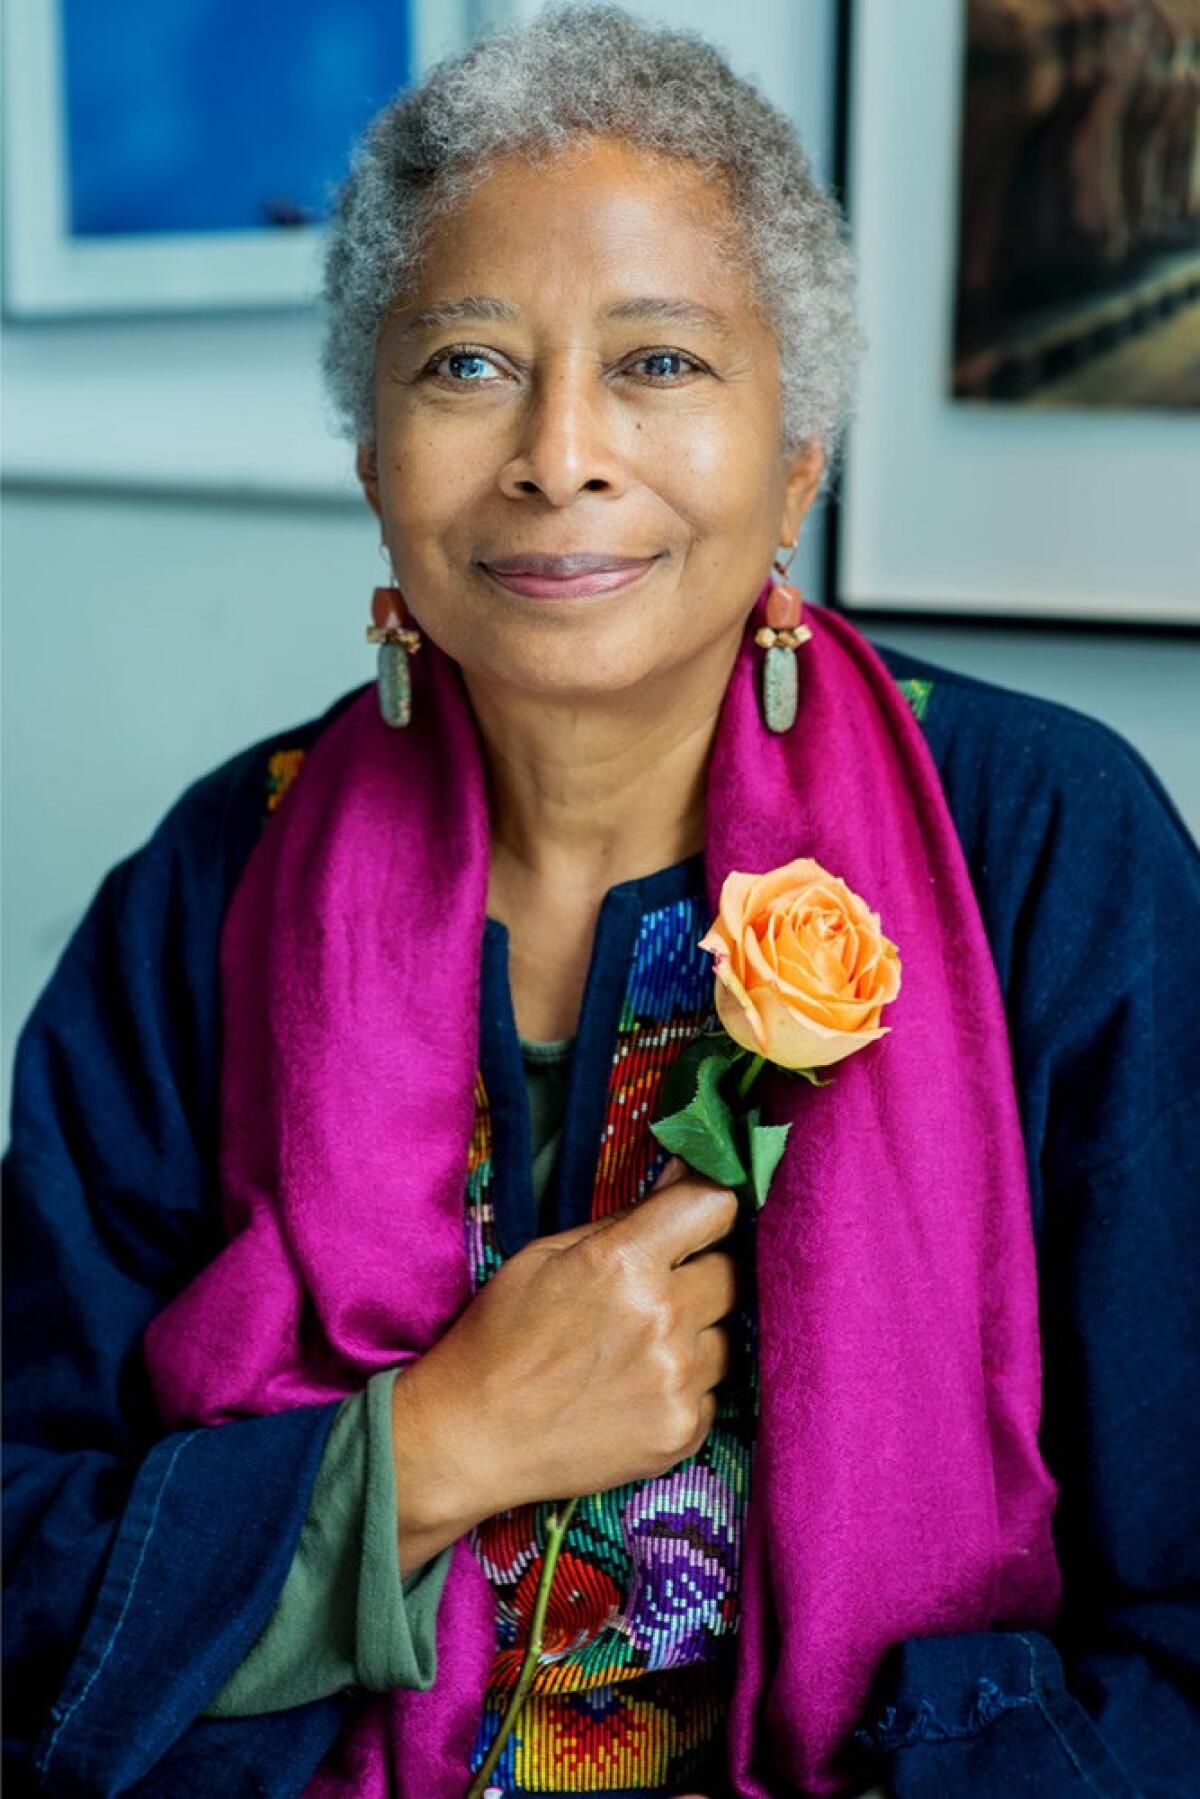 SDCC has canceled its investiture, which was to feature writer Alice Walker.